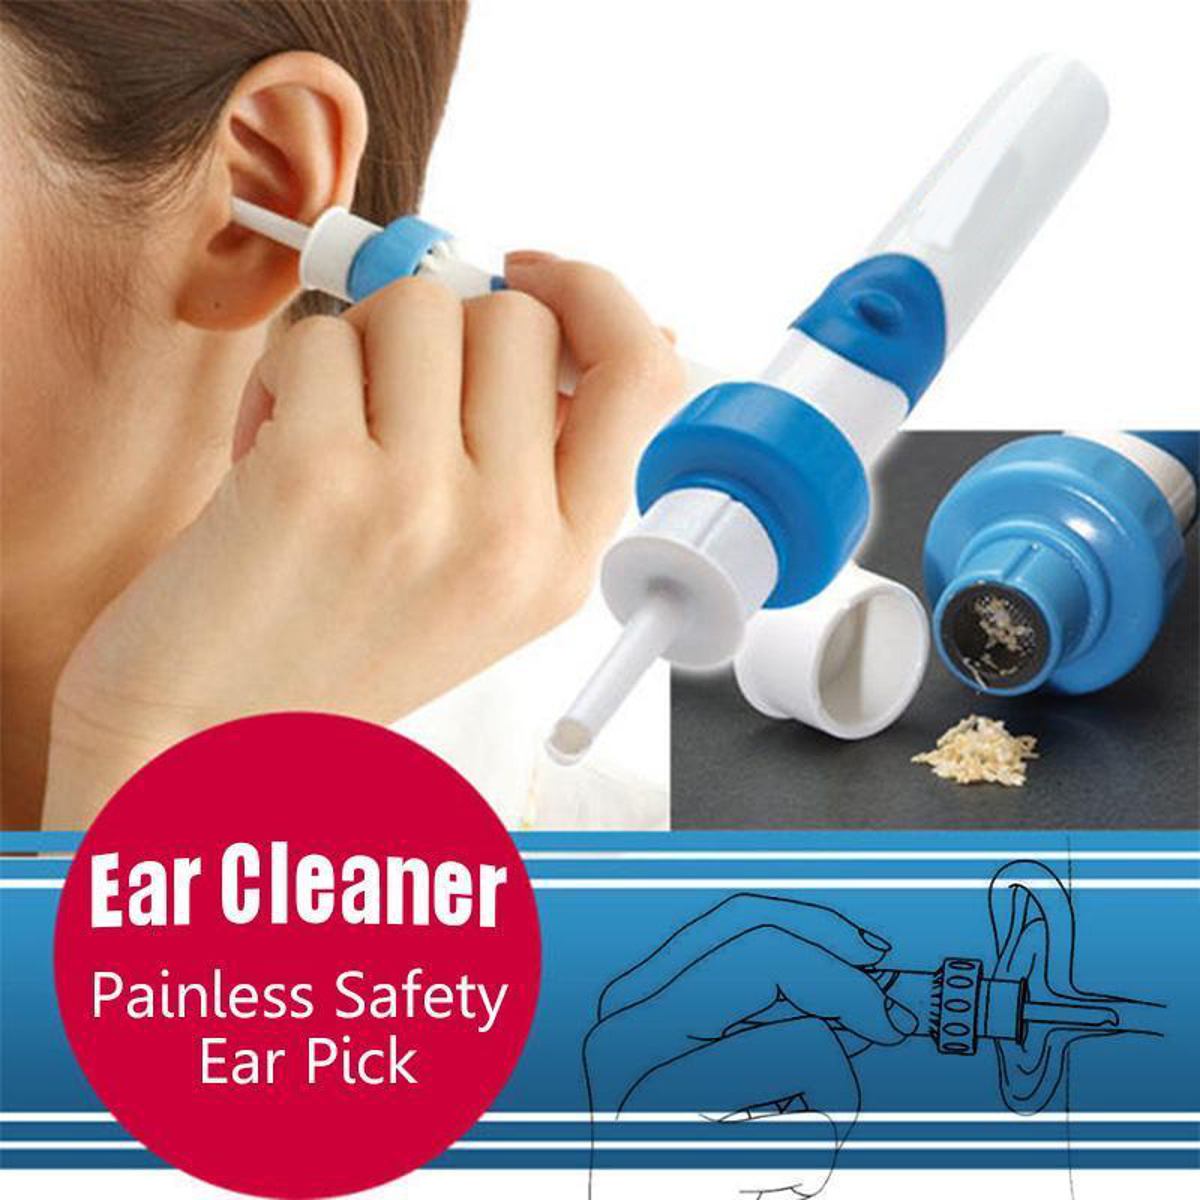 Who should buy the Ear Wax Removal Vacuum Cleaner?